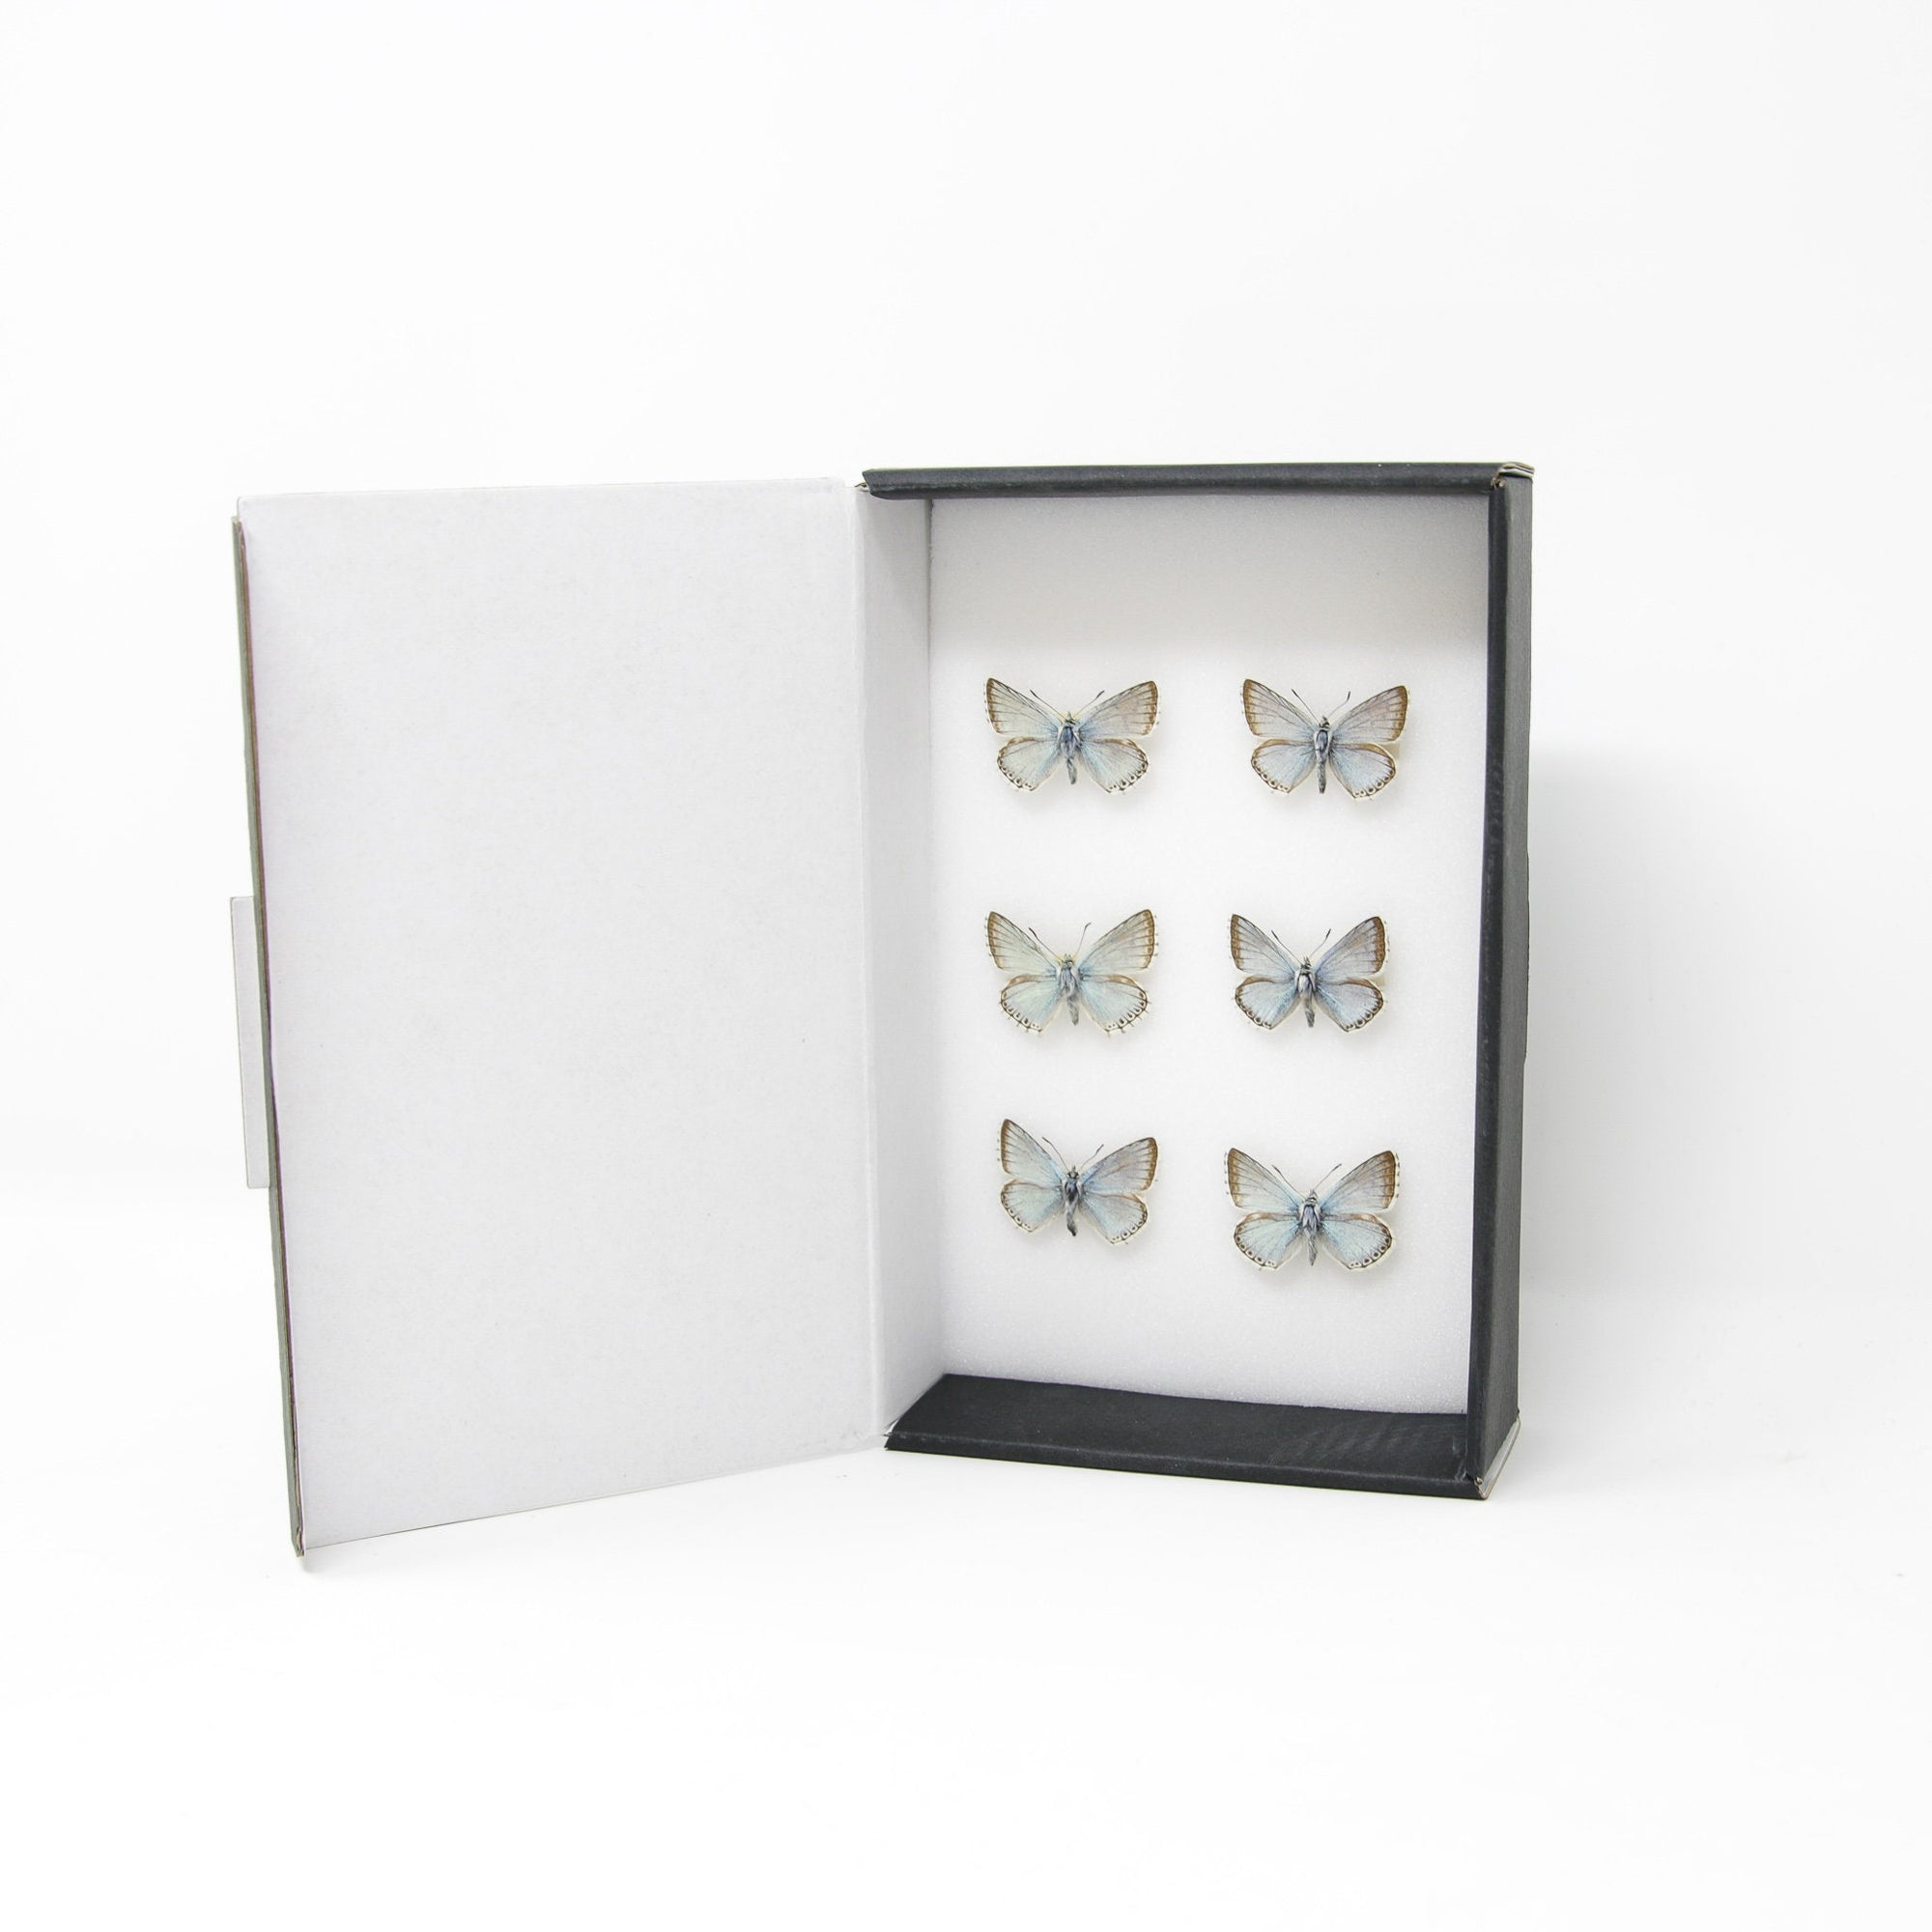 A Collection of Chalkhill Blue Butterflies (Lysandra coridon)  with Scientific Collection Data, A1 Quality, Real Lepidoptera Specimens #SE03